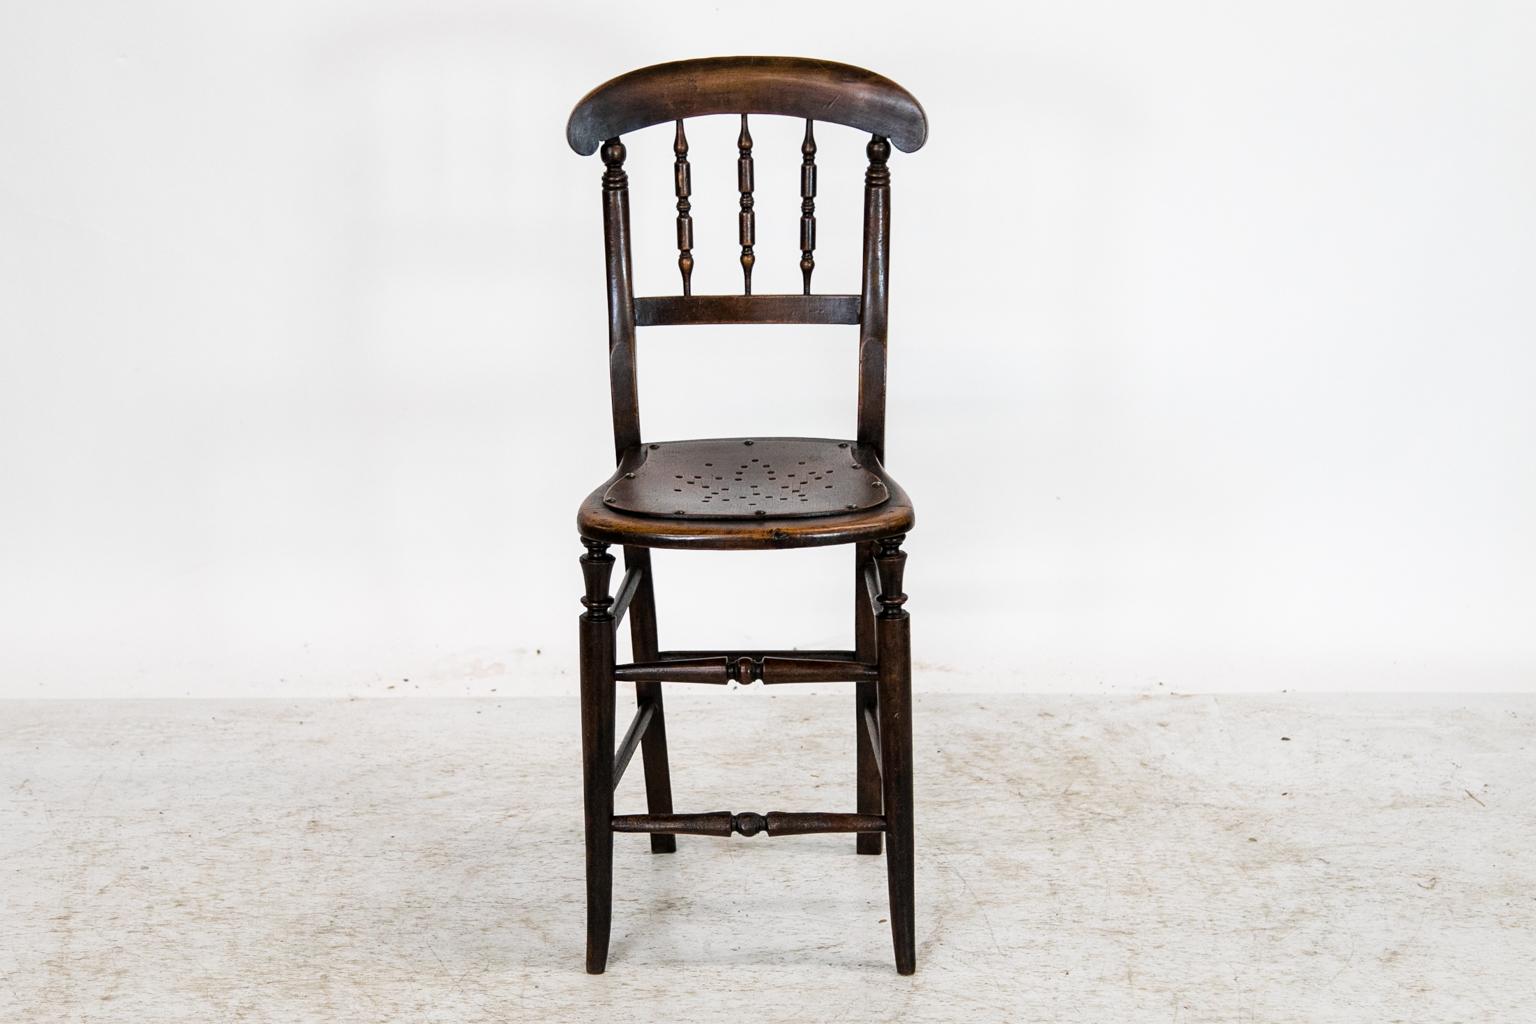 This child's chair has a scrolled crest rail above three turned spindles in the back. The seat is the original pressed wood with a perforated star pattern. The front legs are turned with double turned cross stretchers and terminate with a slight